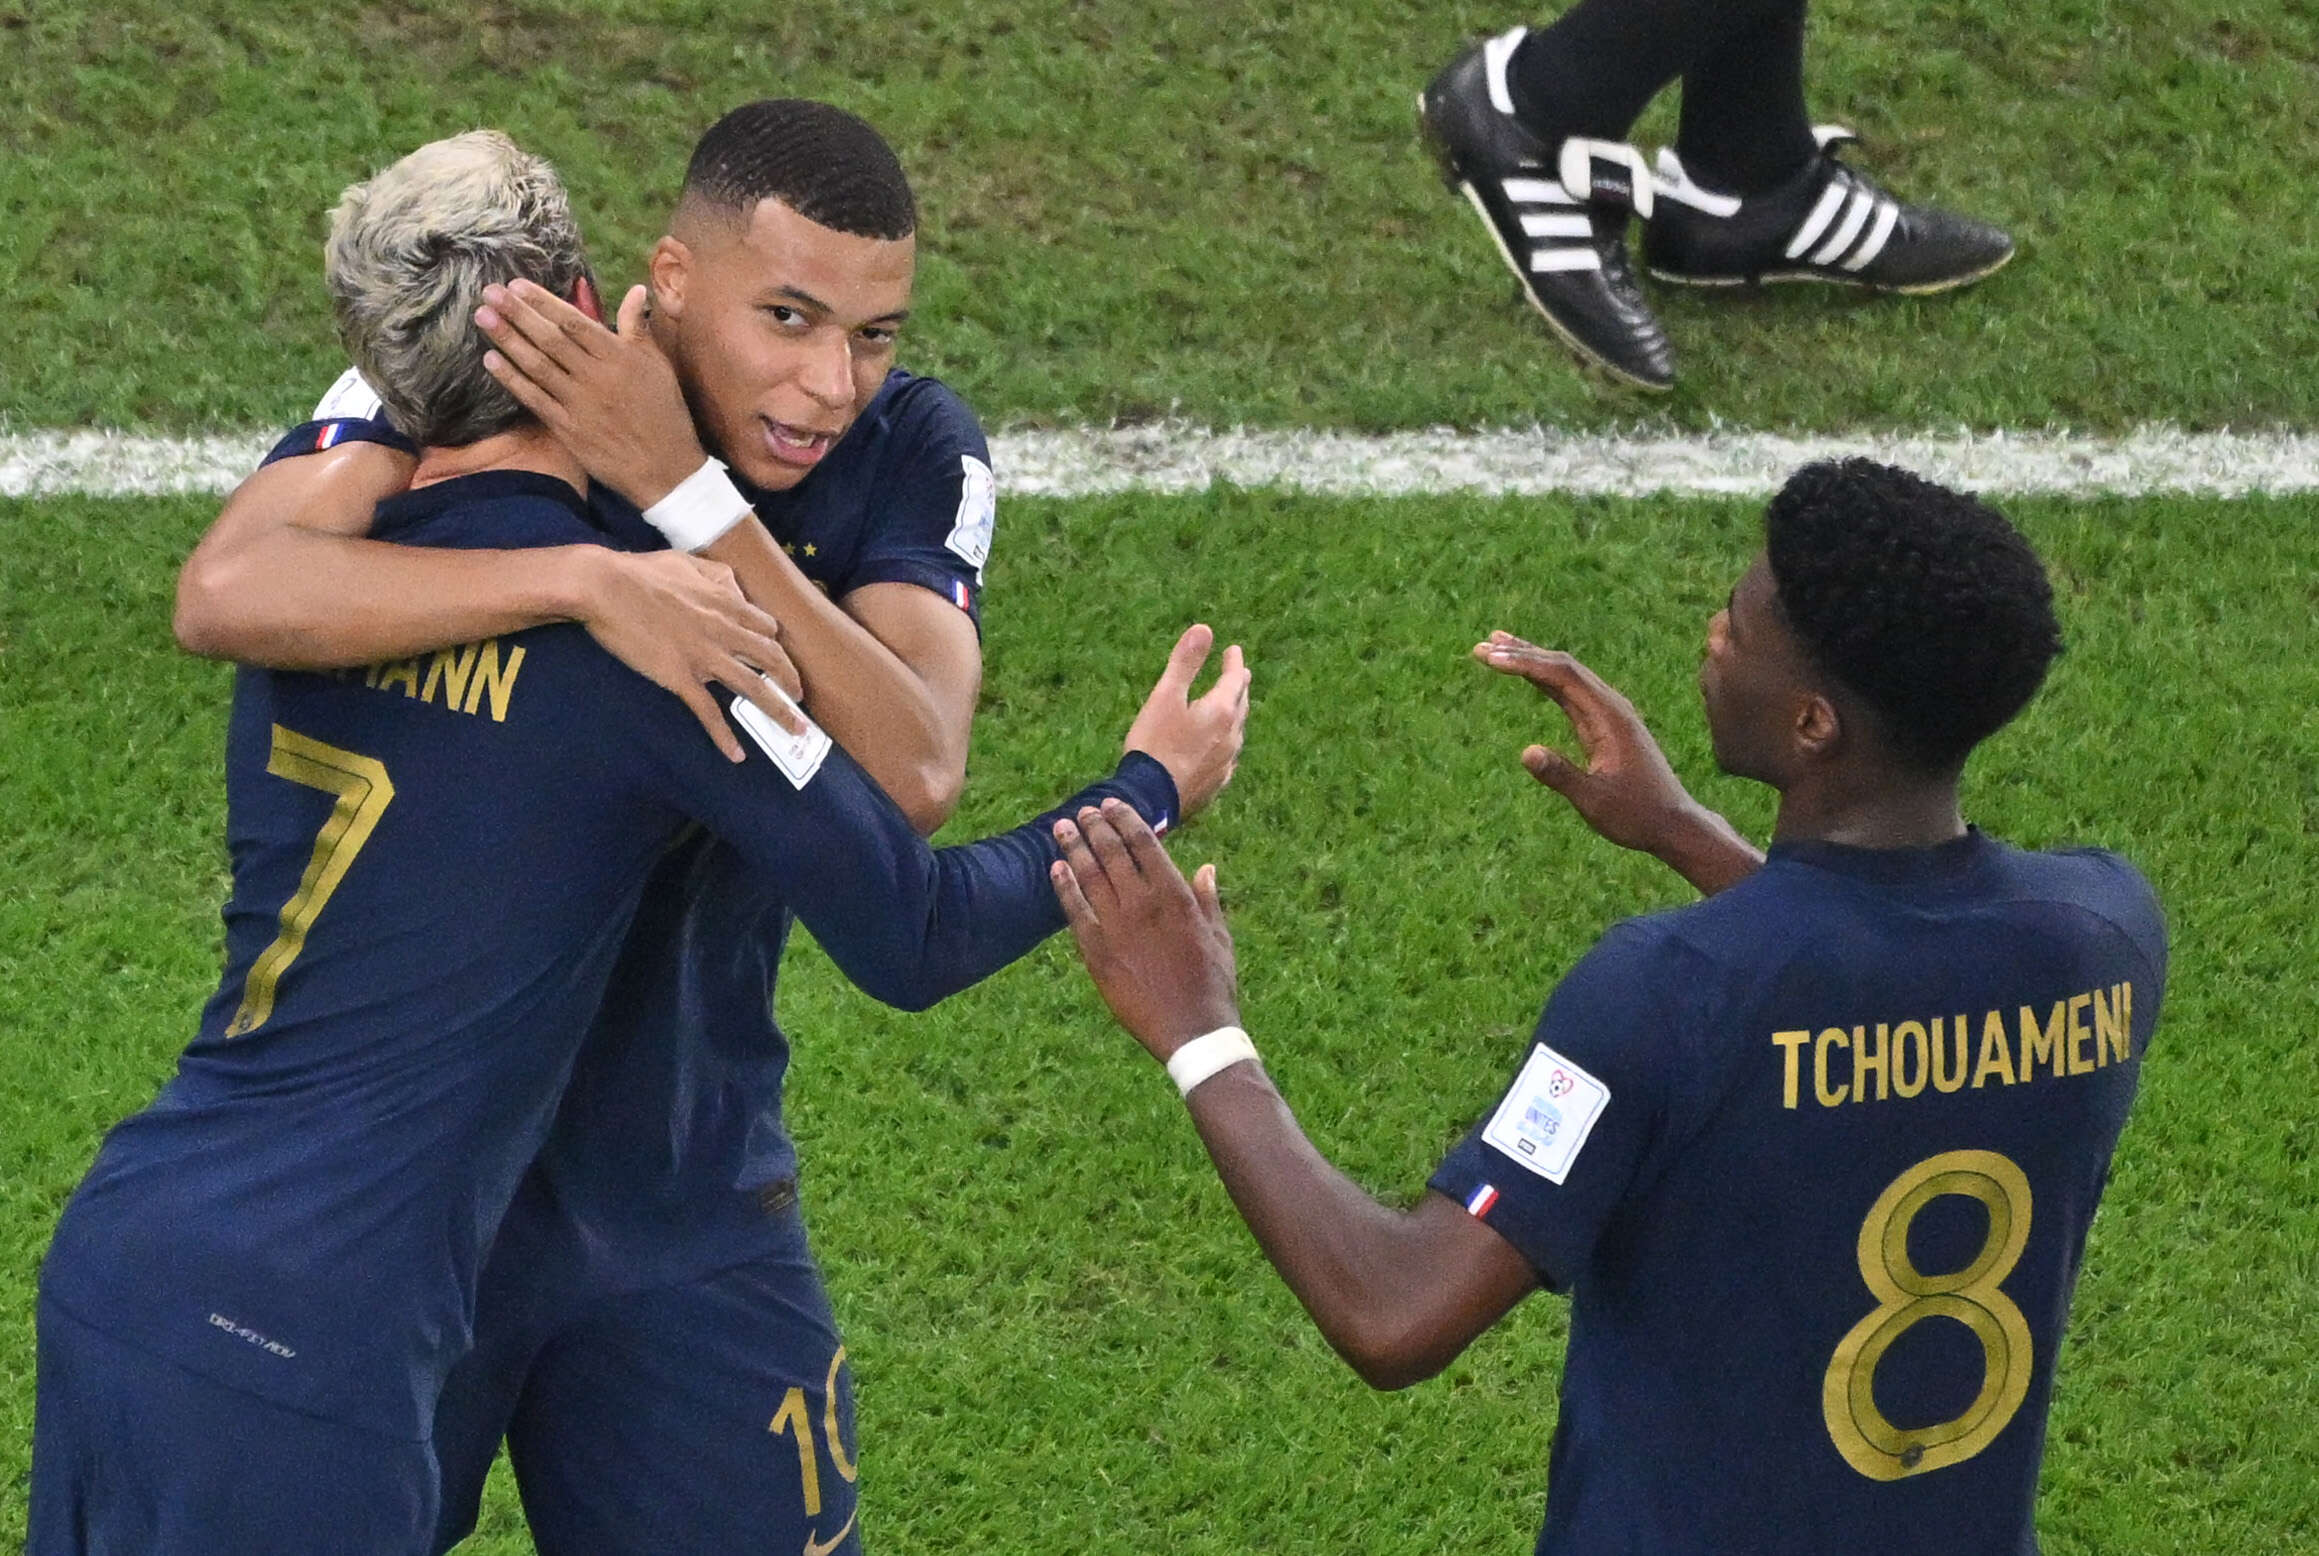 France's forward #07 Antoine Griezmann celebrates with France's forward #10 Kylian Mbappe and France's midfielder #08 Aurelien Tchouameni after scoring his team's first goal which was later disallowed after a VAR review for off-side during the Qatar 2022 World Cup Group D football match between Tunisia and France at the Education City Stadium in Al-Rayyan, west of Doha on November 30, 2022. (Photo by Antonin THUILLIER / AFP)